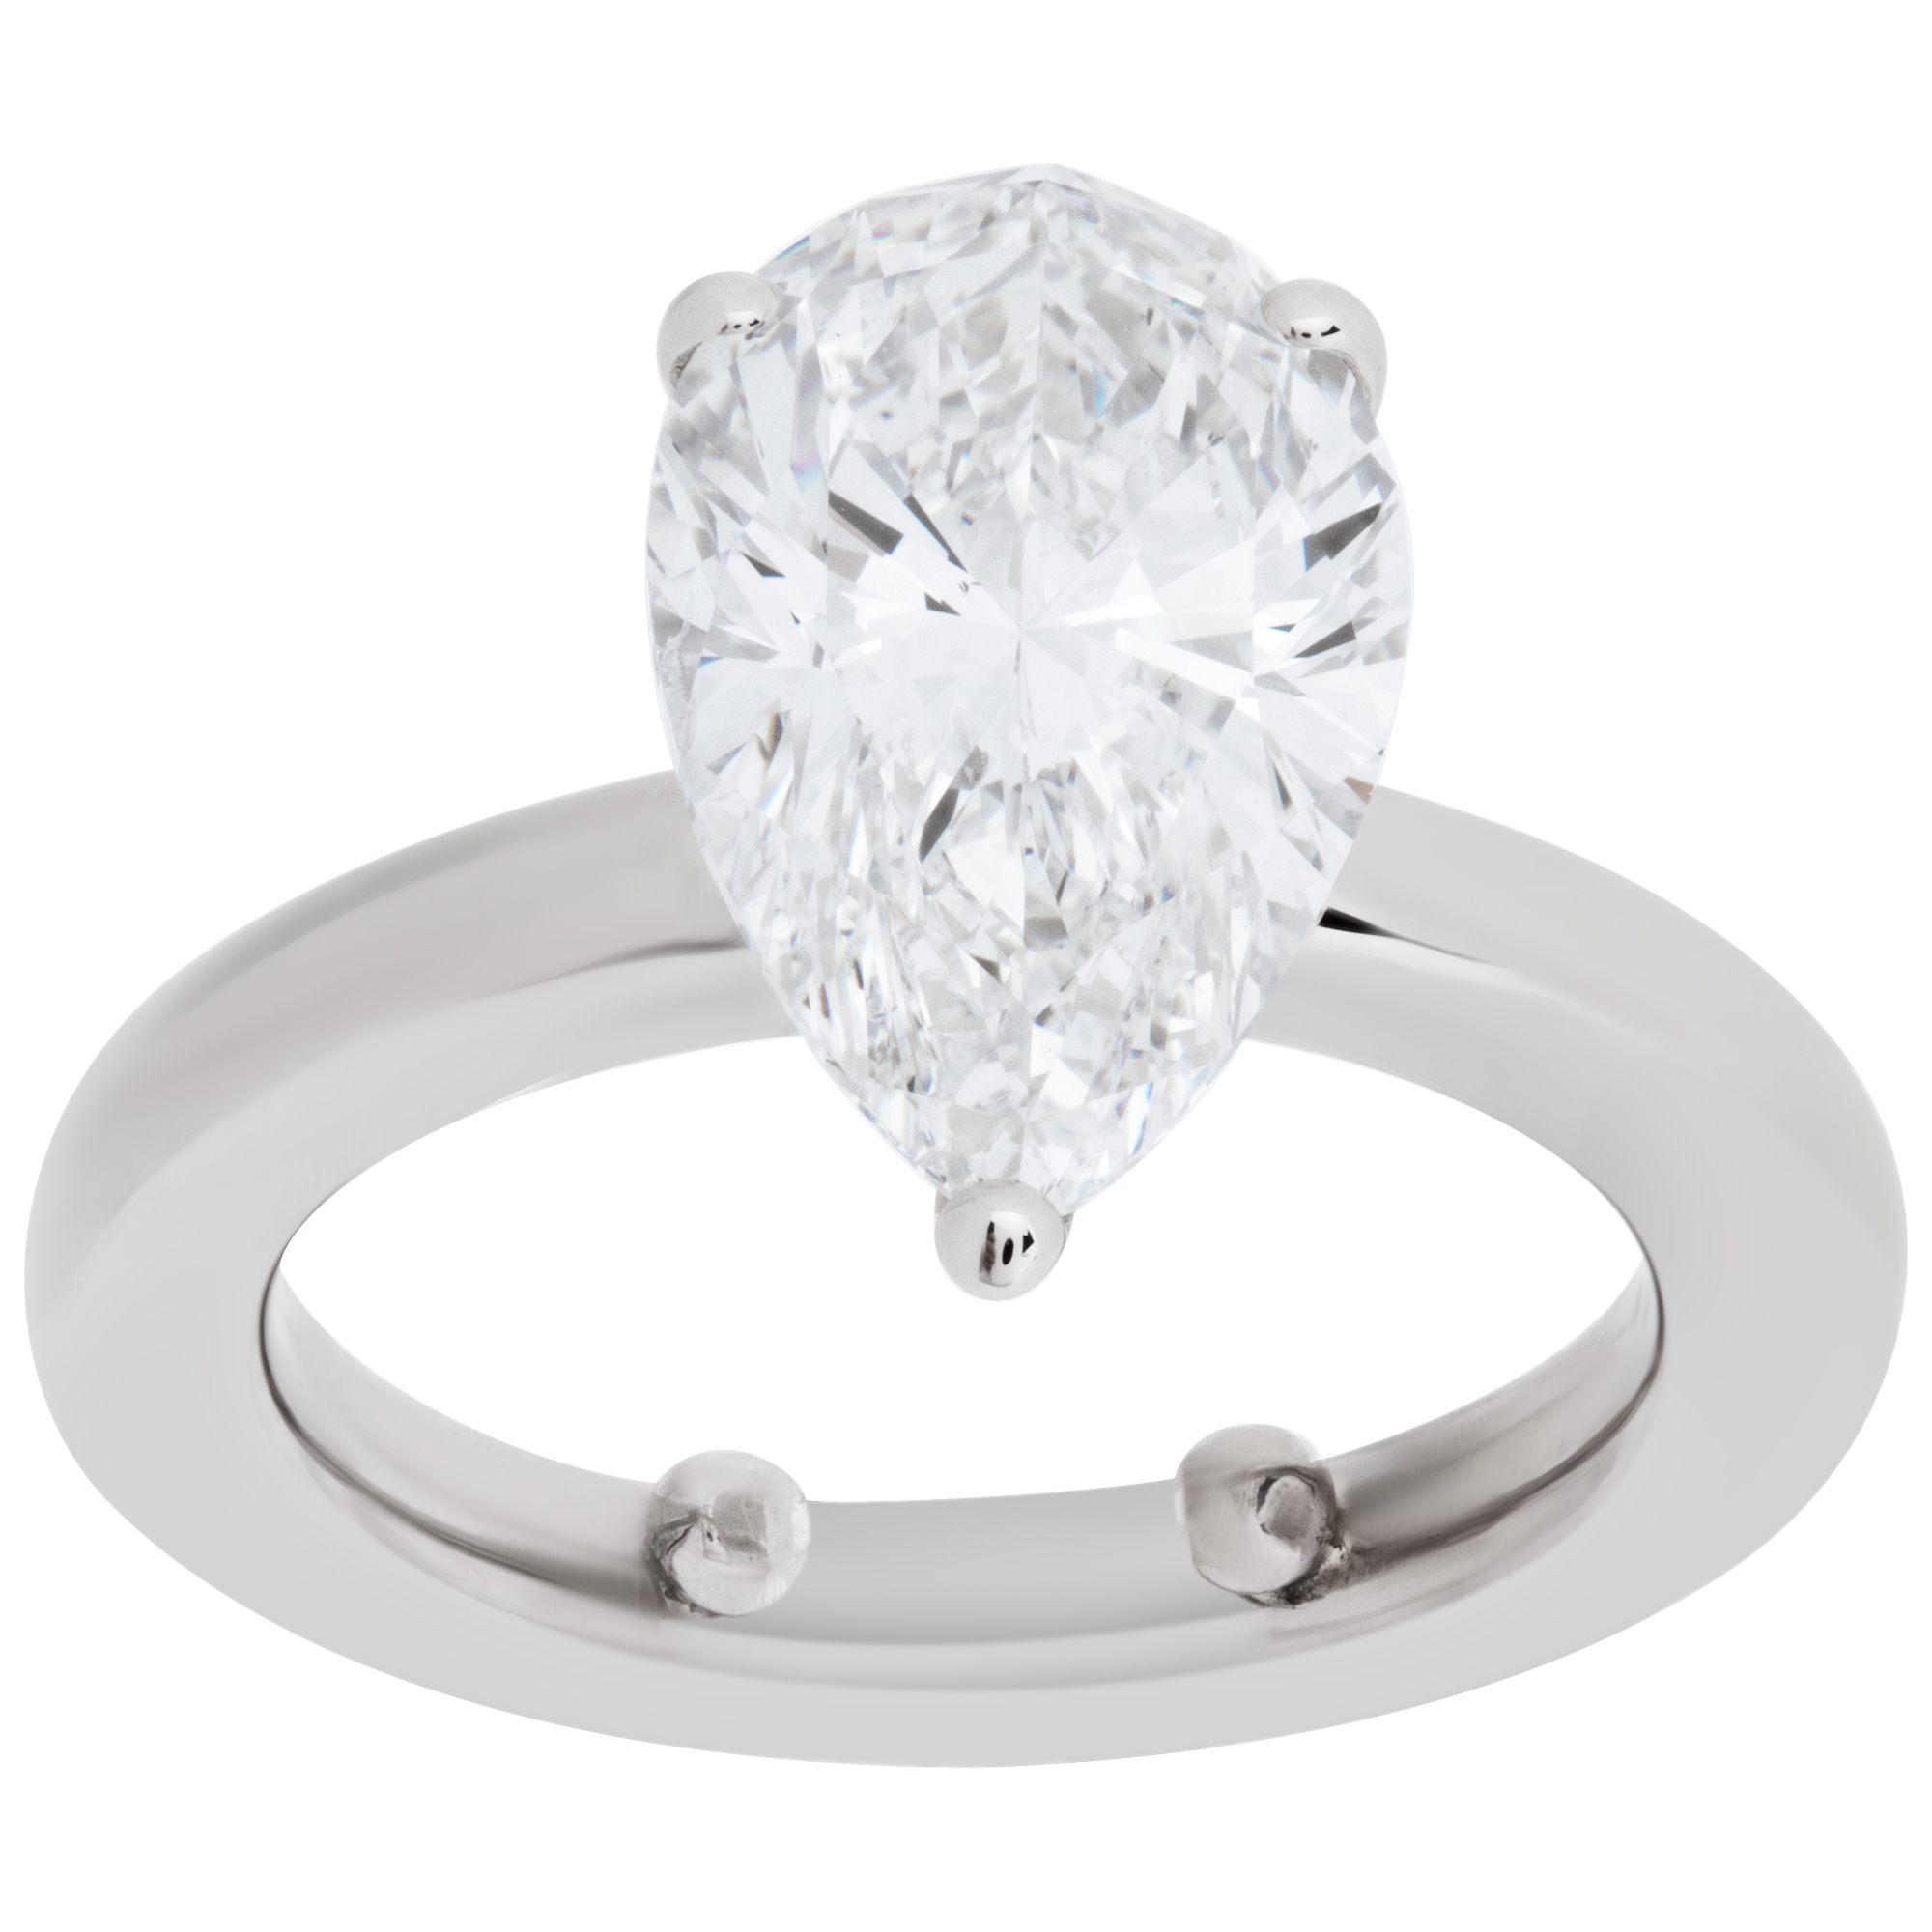 GIA certified pear shape 3.18 carat diamond (J color, SI2 clarity) soliaire ring set in platinum image 1